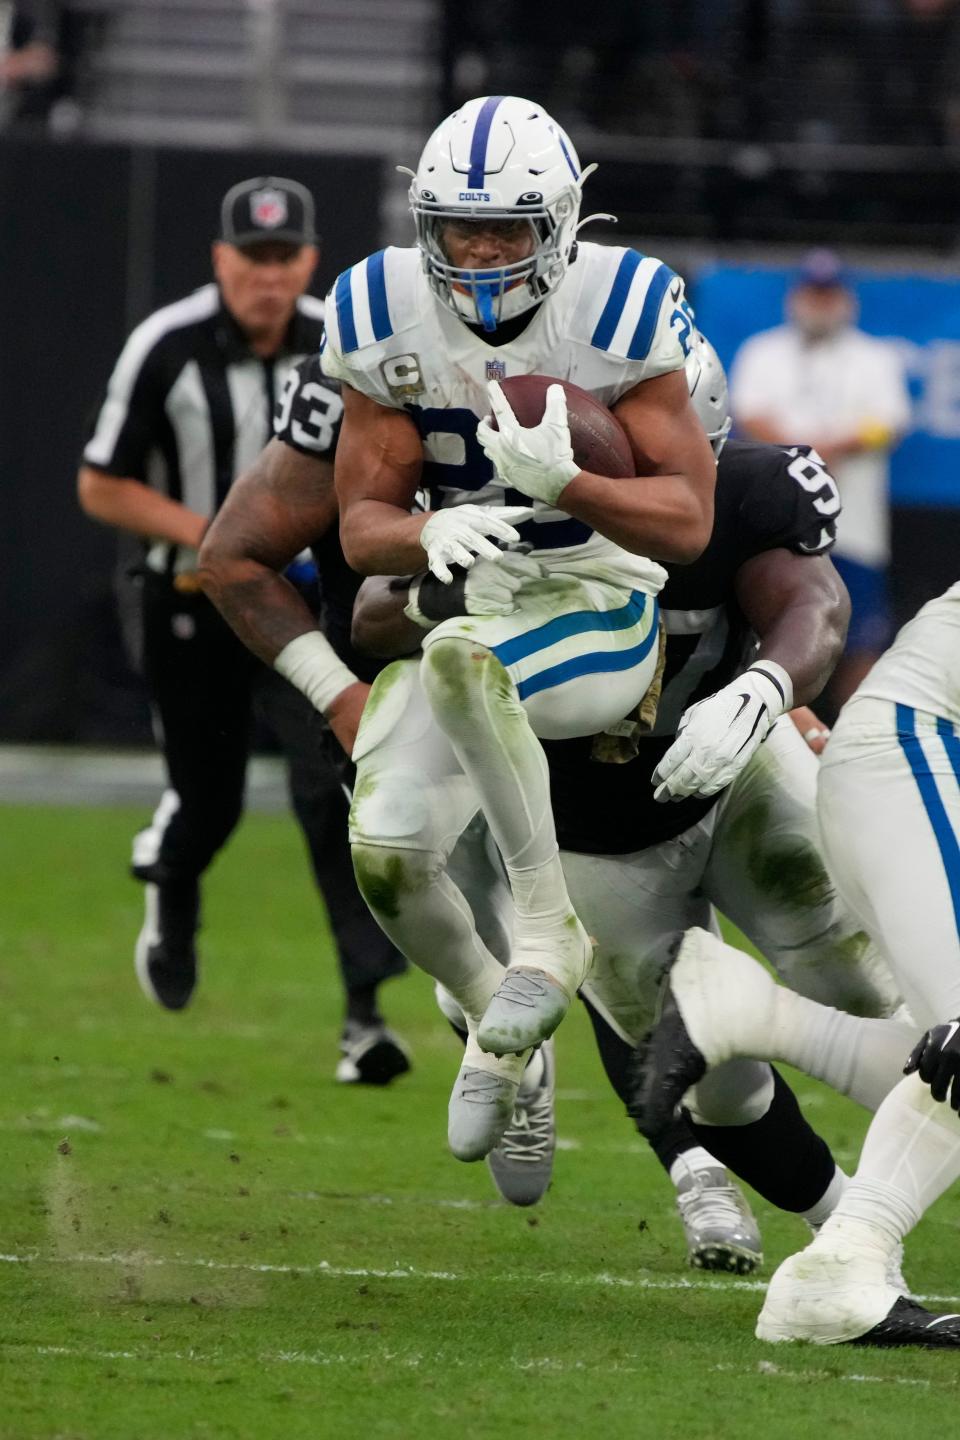 Indianapolis Colts running back Jonathan Taylor (28) runs the ball against the Las Vegas Raiders during the first half of an NFL football game, Sunday, Nov 13, 2022, in Las Vegas.